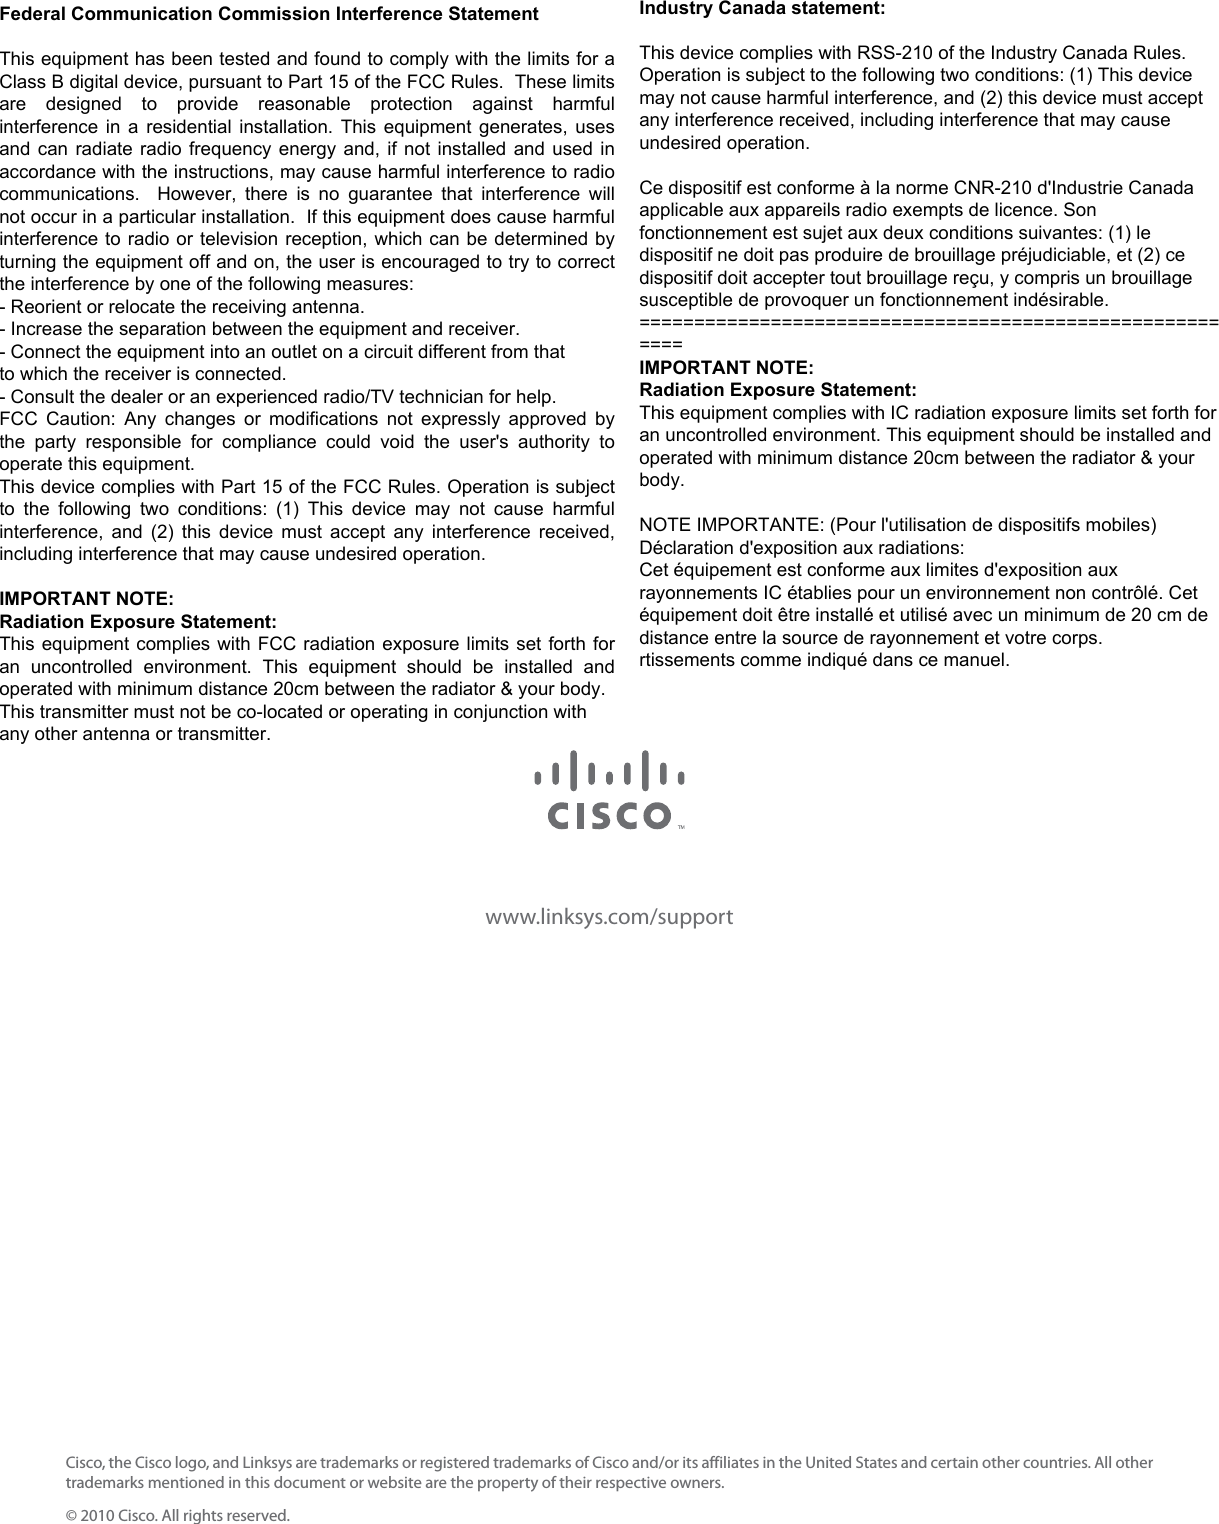 www.linksys.com/supportCisco, the Cisco logo, and Linksys are trademarks or registered trademarks of Cisco and/or its affiliates in the United States and certain other countries. All other trademarks mentioned in this document or website are the property of their respective owners.© 2010 Cisco. All rights reserved.Federal Communication Commission Interference Statement  This equipment has been tested and found to comply with the limits for a Class B digital device, pursuant to Part 15 of the FCC Rules.  These limits are  designed  to  provide  reasonable  protection  against  harmful interference in a residential installation. This equipment generates, uses and can radiate radio frequency energy and, if not installed and used in accordance with the instructions, may cause harmful interference to radio communications.    However,  there  is  no  guarantee  that  interference  will not occur in a particular installation.  If this equipment does cause harmful interference to radio or television reception, which can be determined by turning the equipment off and on, the user is encouraged to try to correct the interference by one of the following measures: - Reorient or relocate the receiving antenna. - Increase the separation between the equipment and receiver. - Connect the equipment into an outlet on a circuit different from that to which the receiver is connected. - Consult the dealer or an experienced radio/TV technician for help. FCC Caution:  Any  changes  or  modifications  not  expressly  approved  by the  party  responsible  for  compliance  could  void  the  user&apos;s  authority  to operate this equipment. This device complies with Part 15 of the FCC Rules. Operation is subject to  the  following  two  conditions:  (1)  This  device  may  not  cause  harmful interference, and (2) this device must accept any interference received, including interference that may cause undesired operation.  IMPORTANT NOTE: Radiation Exposure Statement: This equipment complies with FCC radiation exposure limits set forth for an  uncontrolled  environment.  This  equipment  should  be  installed  and operated with minimum distance 20cm between the radiator &amp; your body. This transmitter must not be co-located or operating in conjunction with any other antenna or transmitter. Industry Canada statement:  This device complies with RSS-210 of the Industry Canada Rules. Operation is subject to the following two conditions: (1) This device may not cause harmful interference, and (2) this device must accept any interference received, including interference that may cause undesired operation.  Ce dispositif est conforme à la norme CNR-210 d&apos;Industrie Canada applicable aux appareils radio exempts de licence. Son fonctionnement est sujet aux deux conditions suivantes: (1) le dispositif ne doit pas produire de brouillage préjudiciable, et (2) ce dispositif doit accepter tout brouillage reçu, y compris un brouillage susceptible de provoquer un fonctionnement indésirable. ========================================================= IMPORTANT NOTE: Radiation Exposure Statement: This equipment complies with IC radiation exposure limits set forth for an uncontrolled environment. This equipment should be installed and operated with minimum distance 20cm between the radiator &amp; your body.  NOTE IMPORTANTE: (Pour l&apos;utilisation de dispositifs mobiles) Déclaration d&apos;exposition aux radiations: Cet équipement est conforme aux limites d&apos;exposition aux rayonnements IC établies pour un environnement non contrôlé. Cet équipement doit être installé et utilisé avec un minimum de 20 cm de distance entre la source de rayonnement et votre corps. rtissements comme indiqué dans ce manuel. 